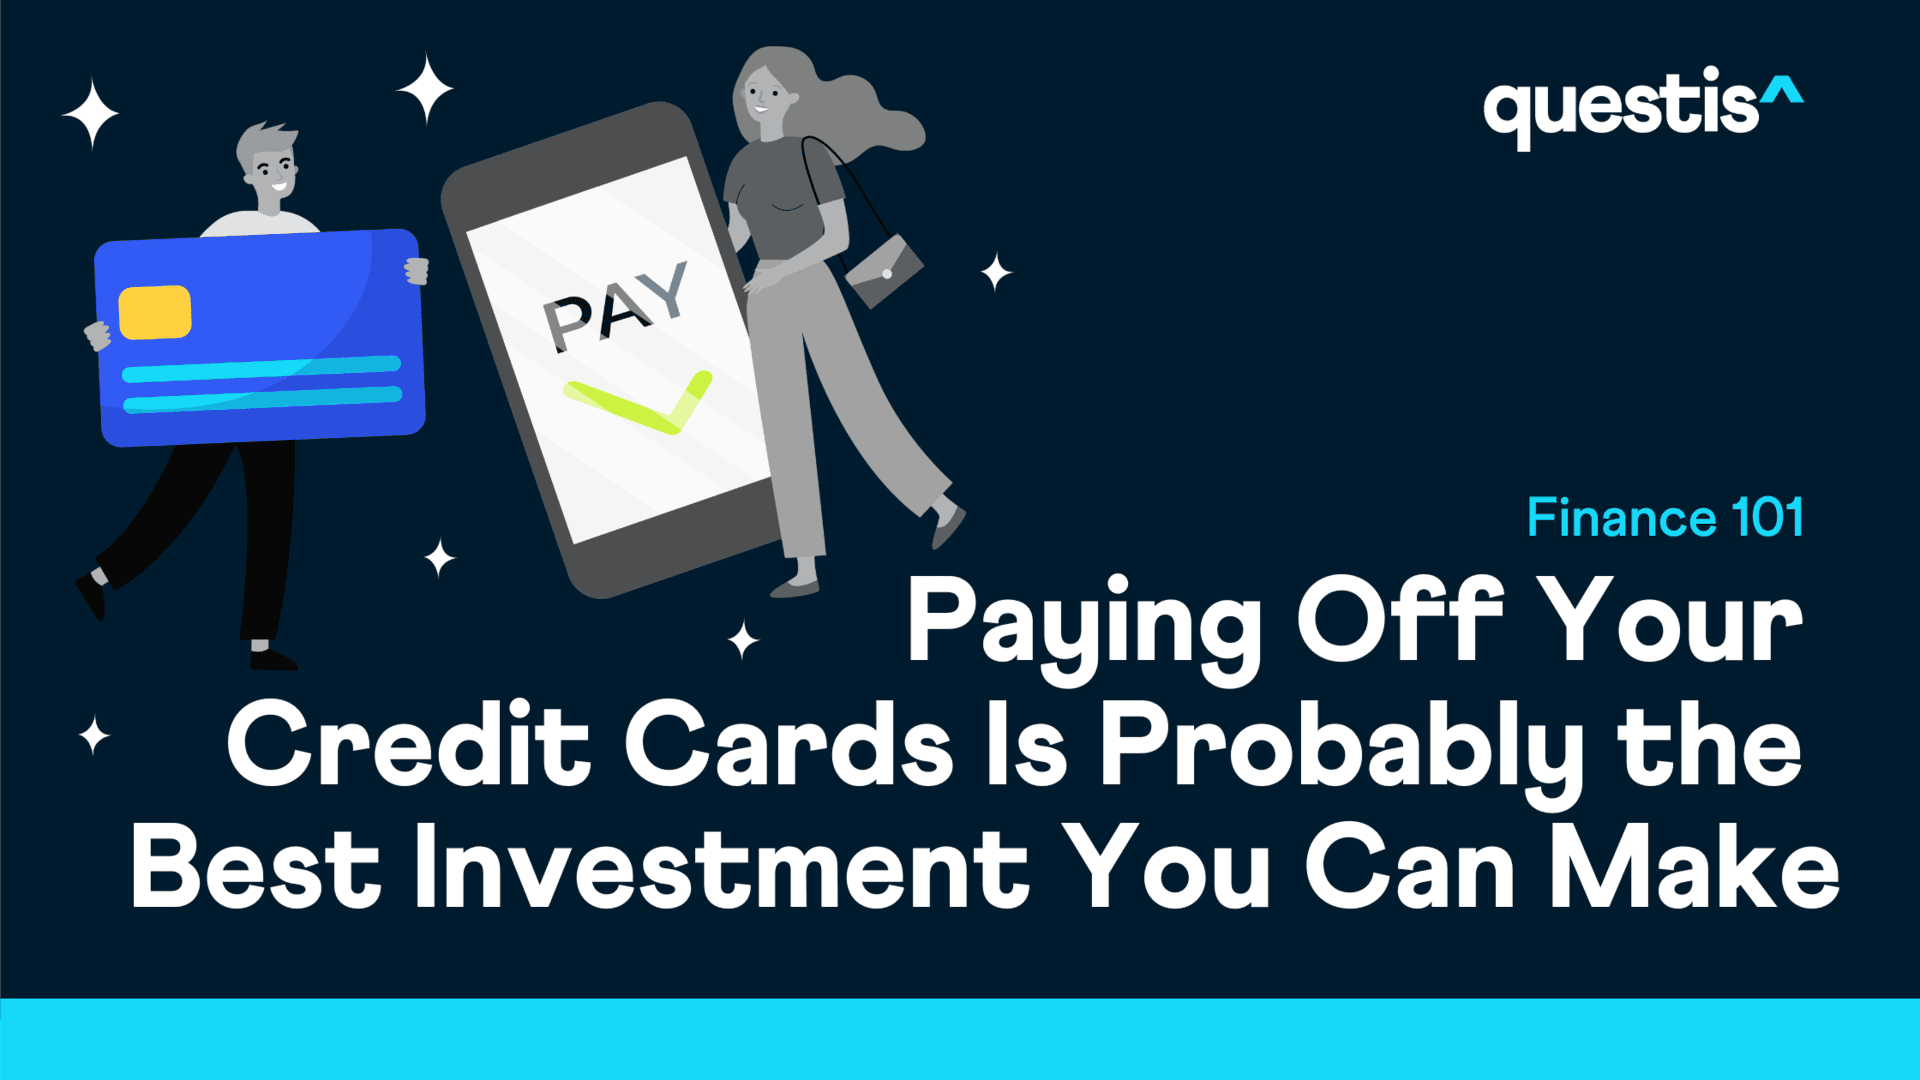 Paying Off Your Credit Cards Is Probably the Best Investment You Can Make